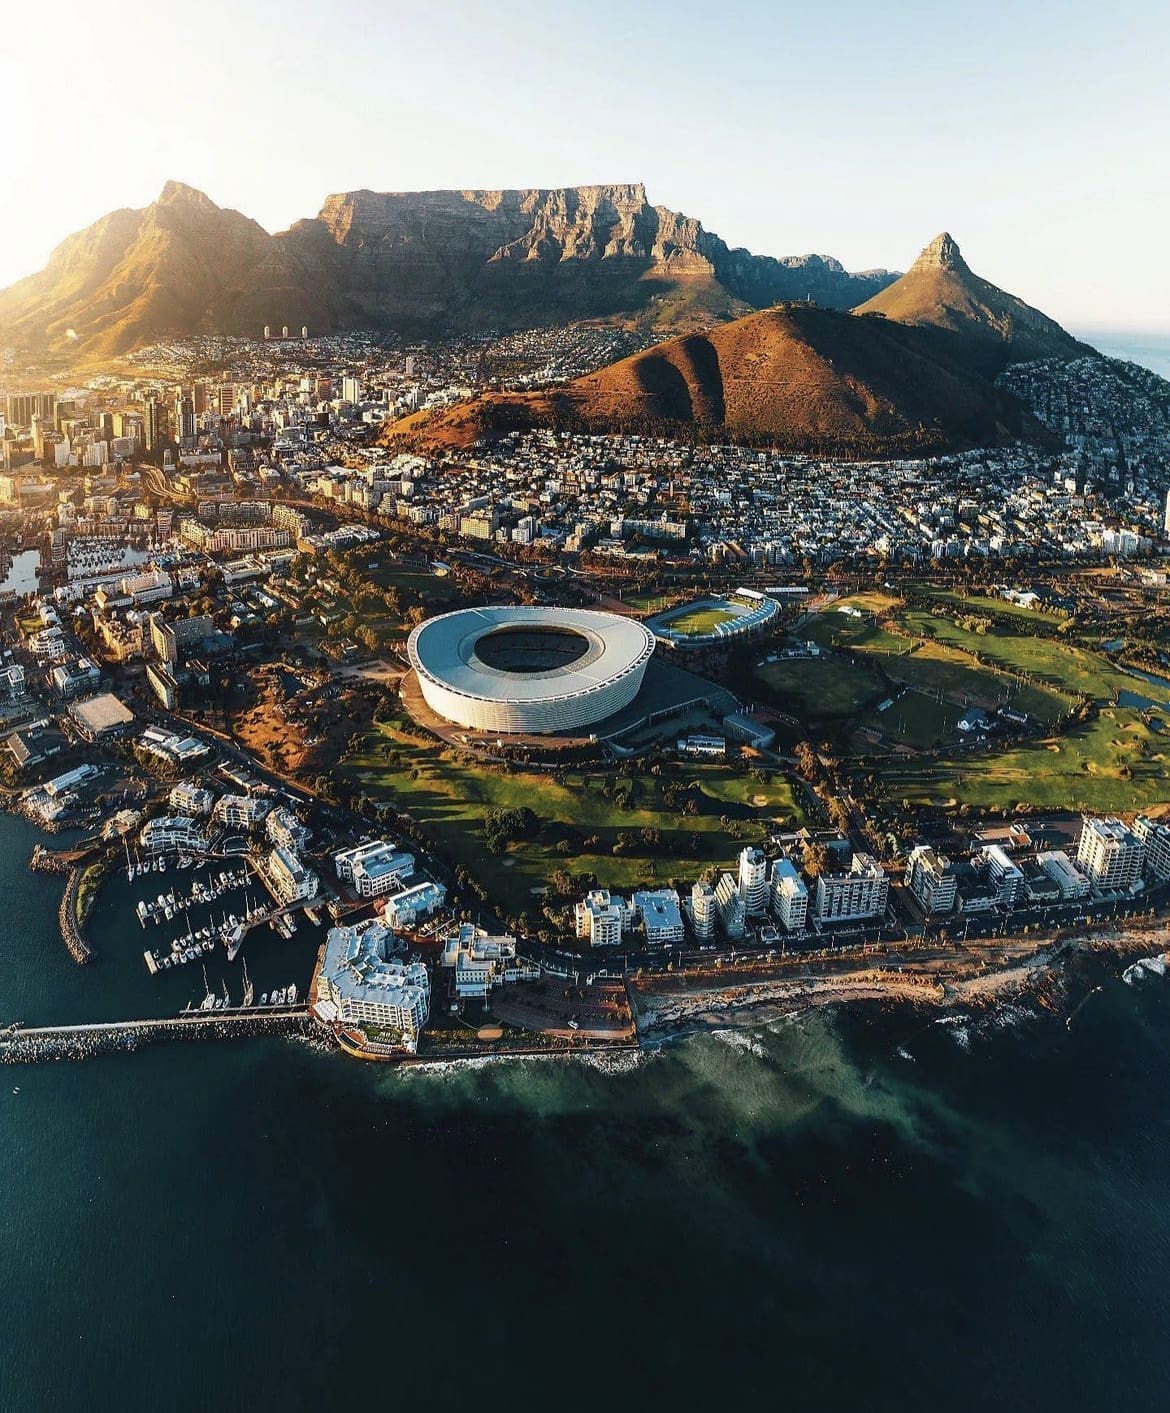 The City of Cape Town, from the view of a helicopte